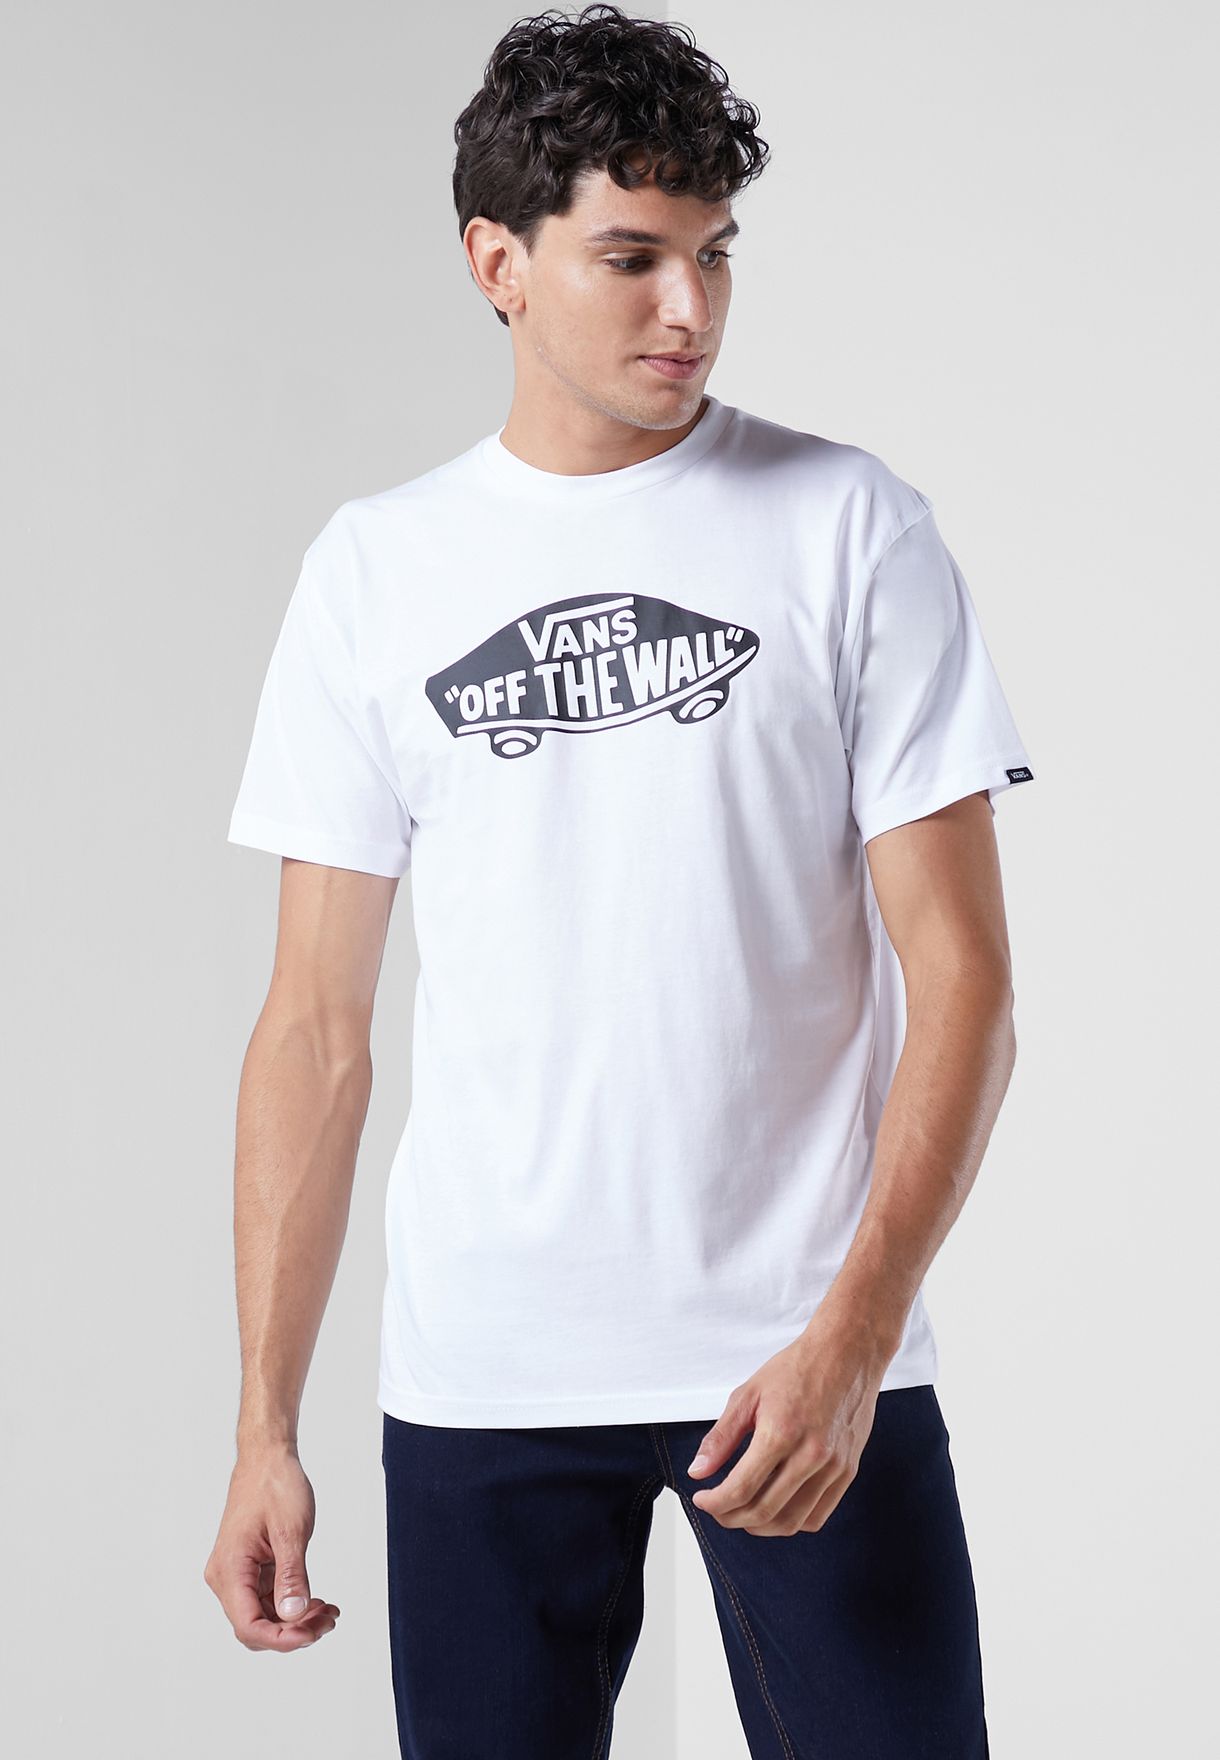 Off The Wall Classic T-Shirt